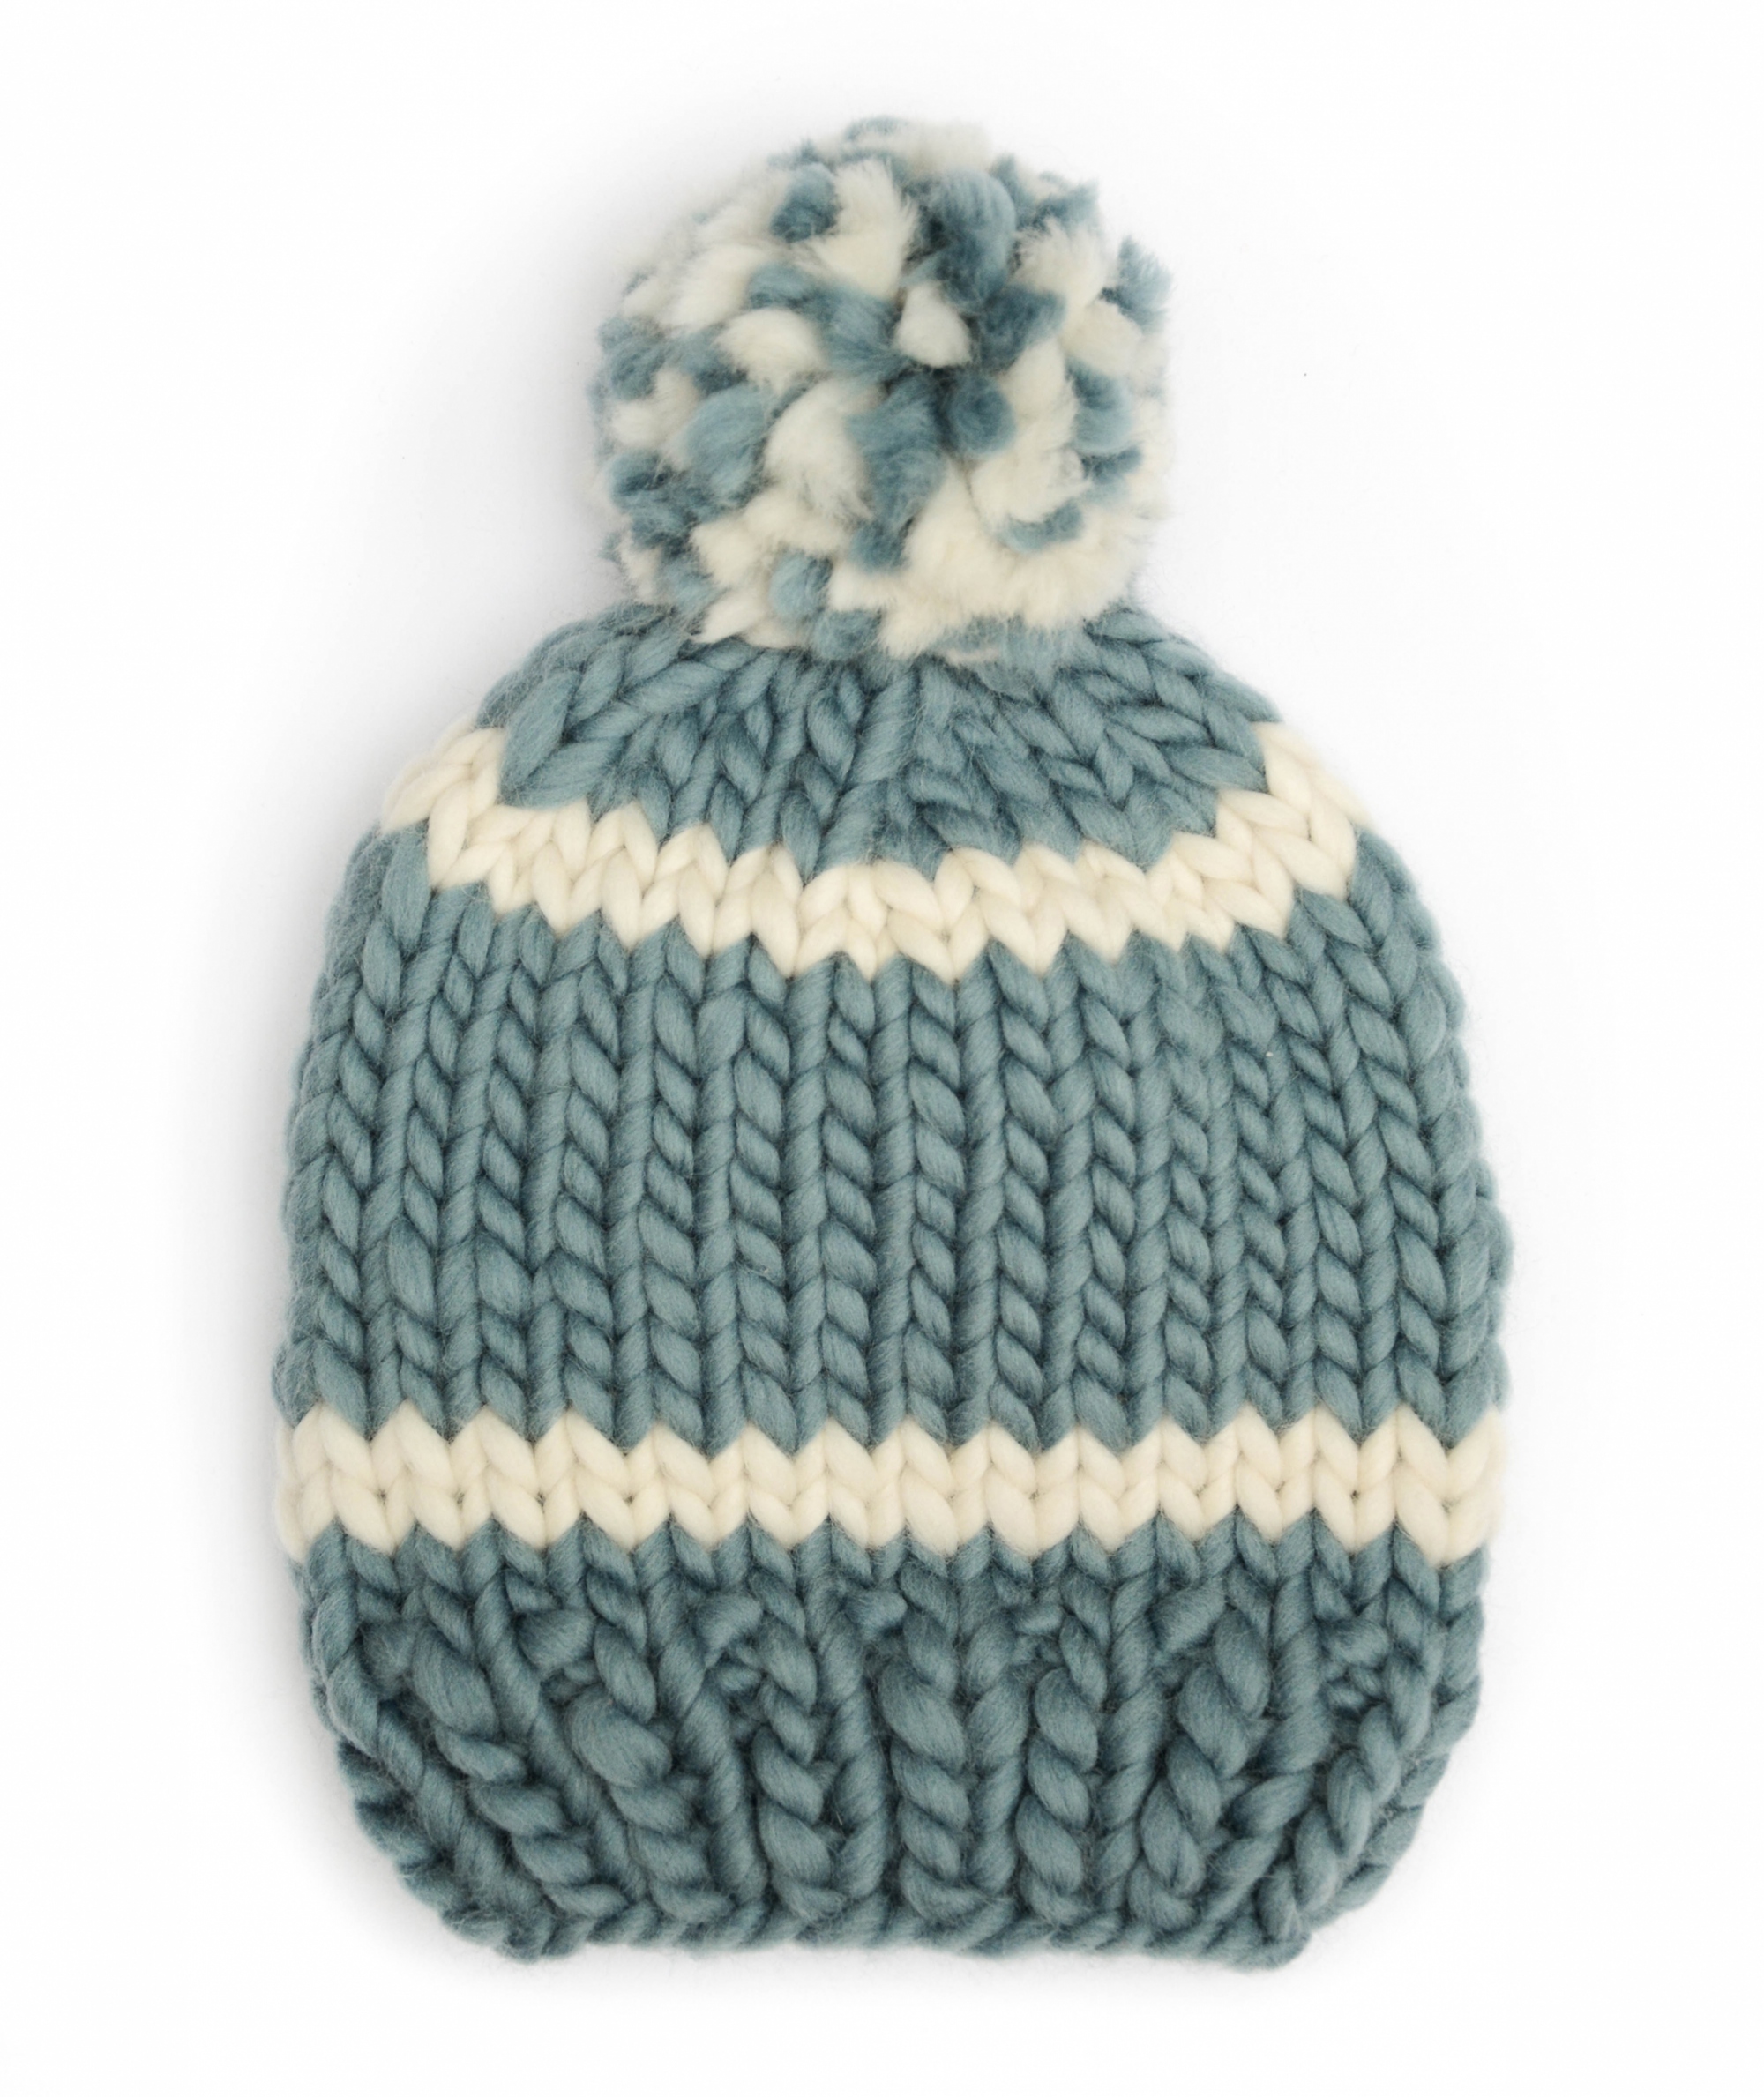 Handmade wool hats - Stone and Ivory striped bobble hat with mixed colour pom pom. Click to customise.